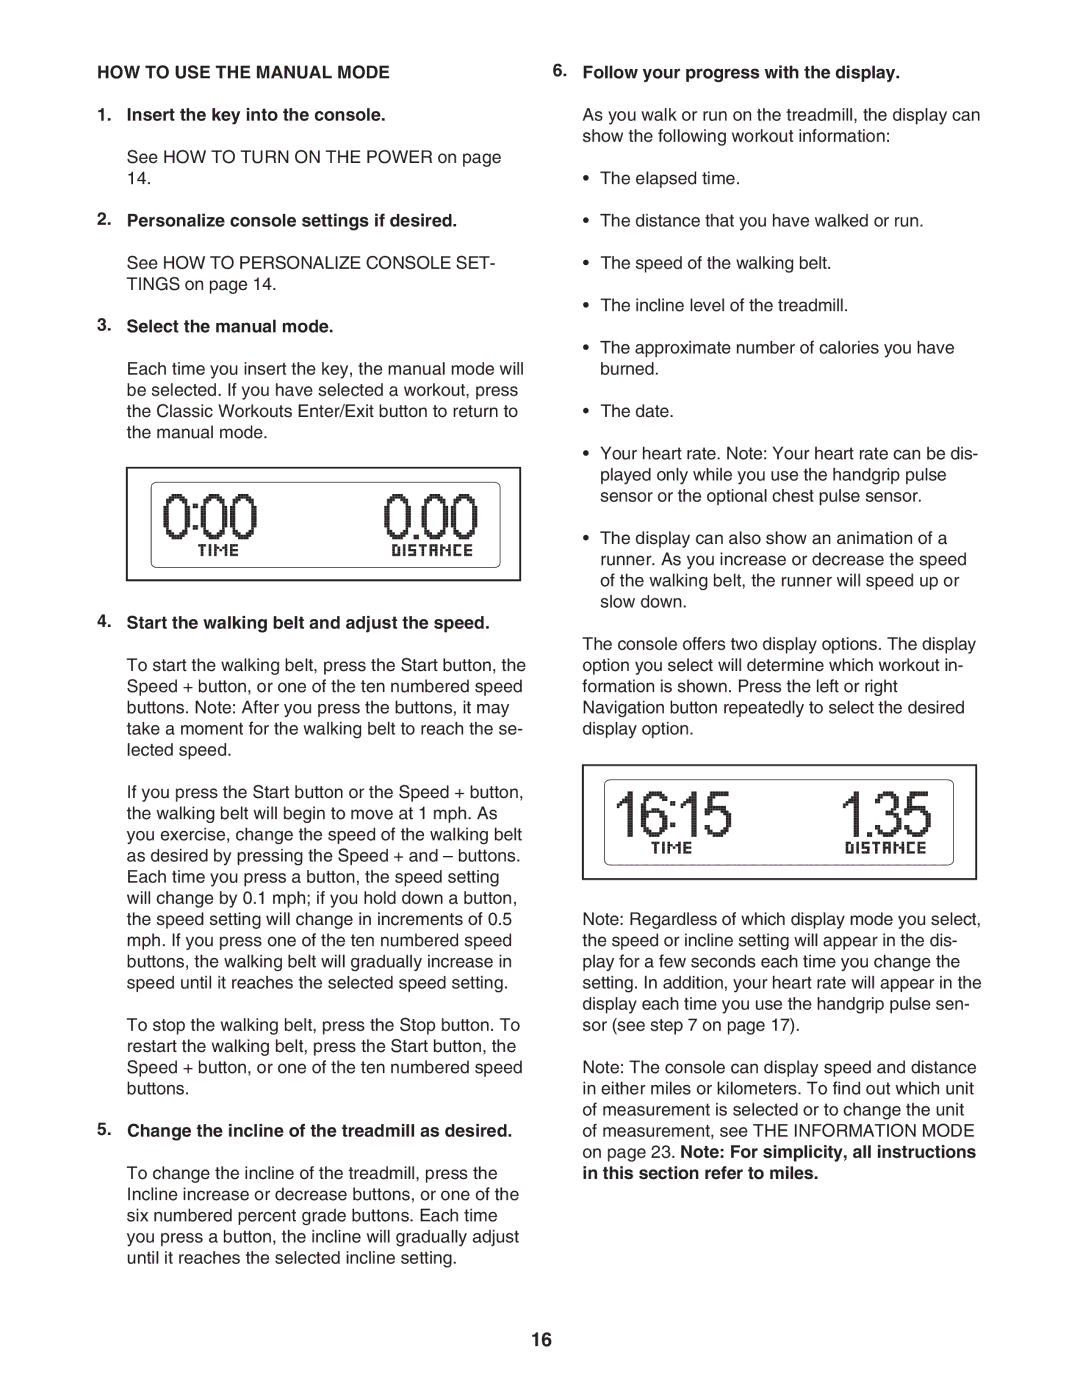 NordicTrack NTL06907.0 user manual HOW to USE the Manual Mode 